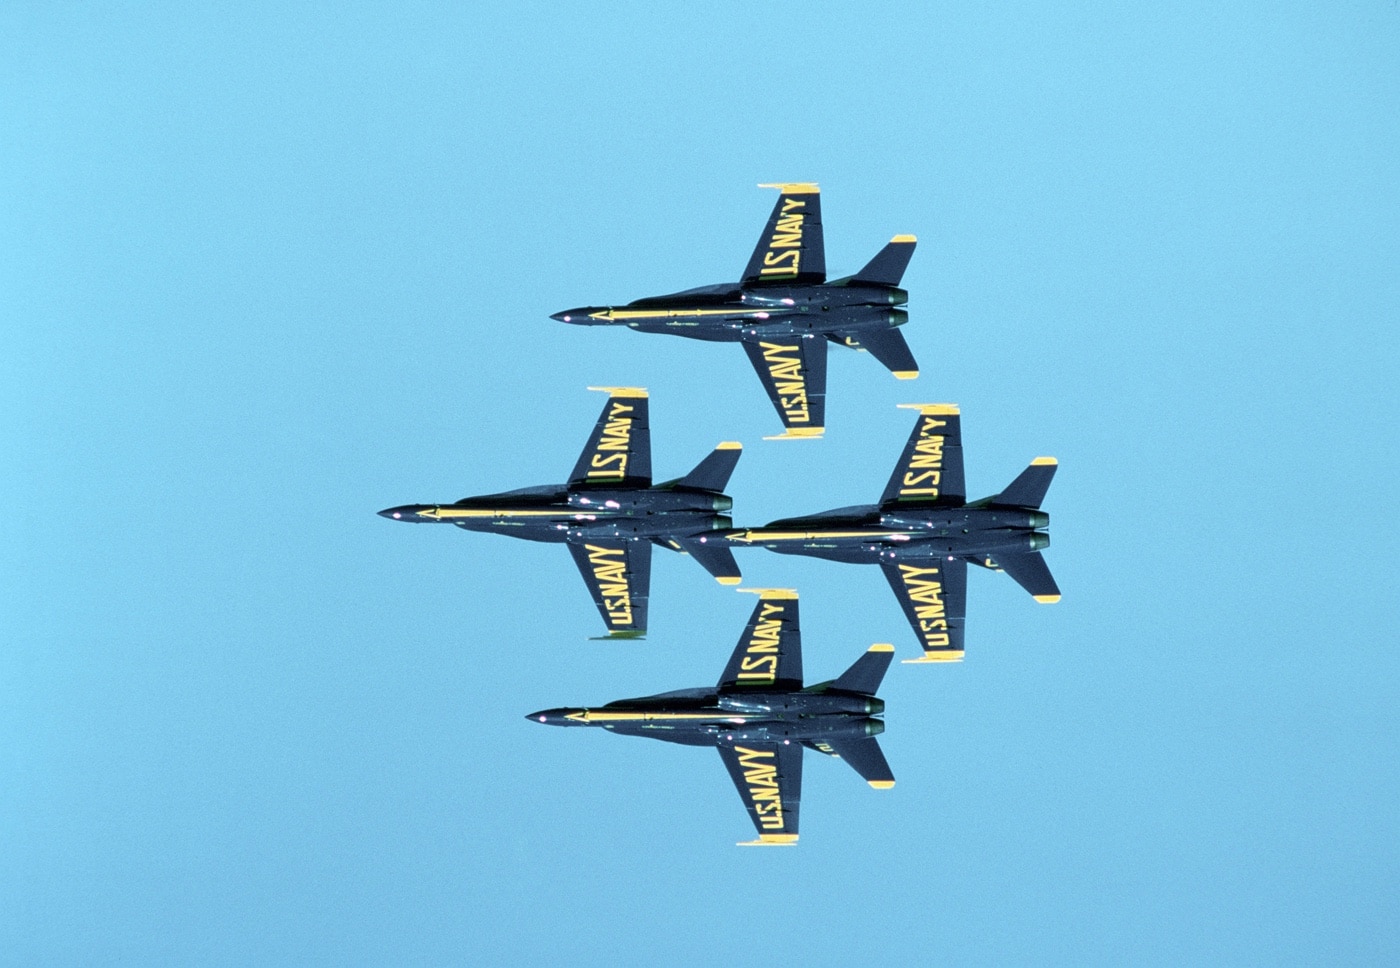 Blue Angels in diamond formation